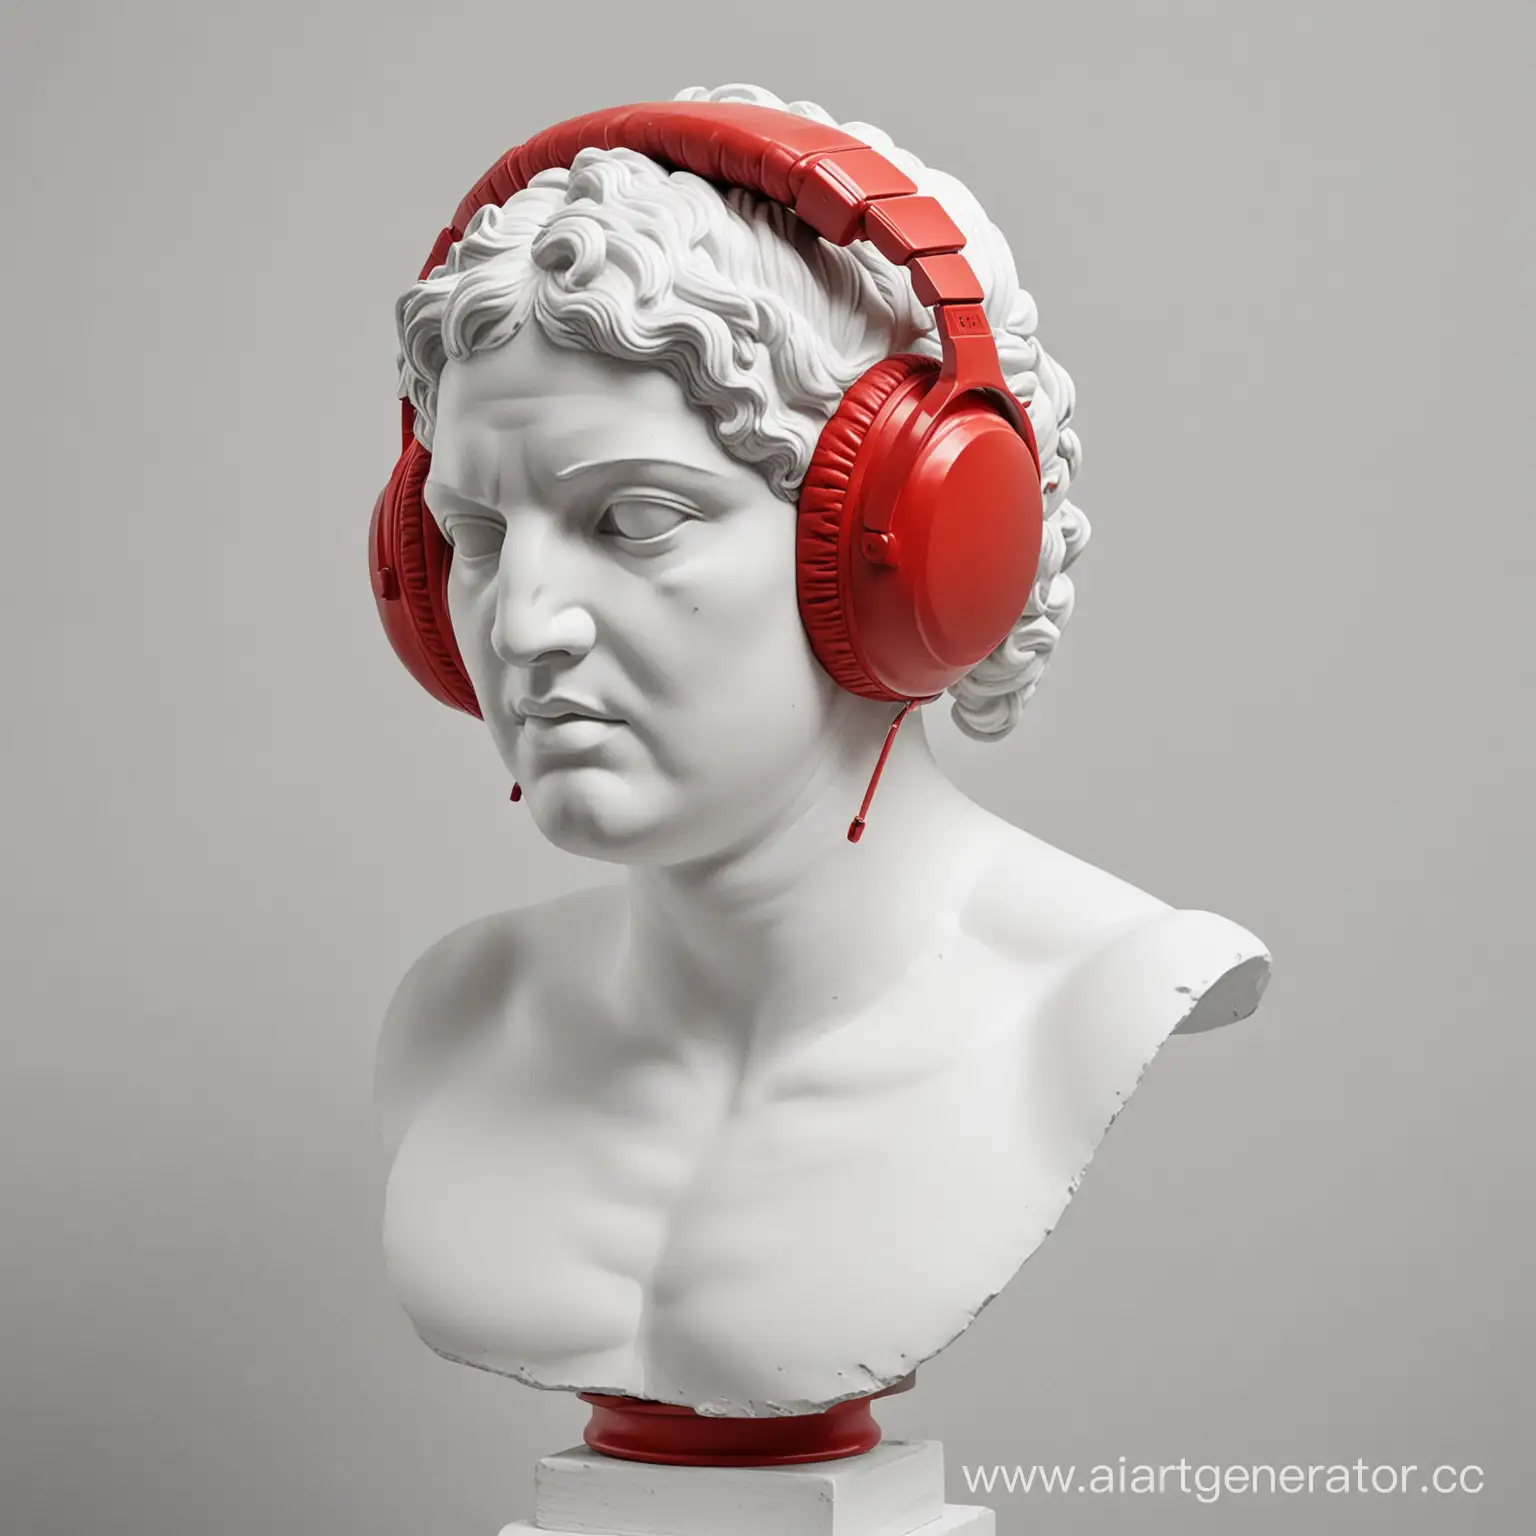 Greek-Statue-Bust-with-Modern-Red-Headphones